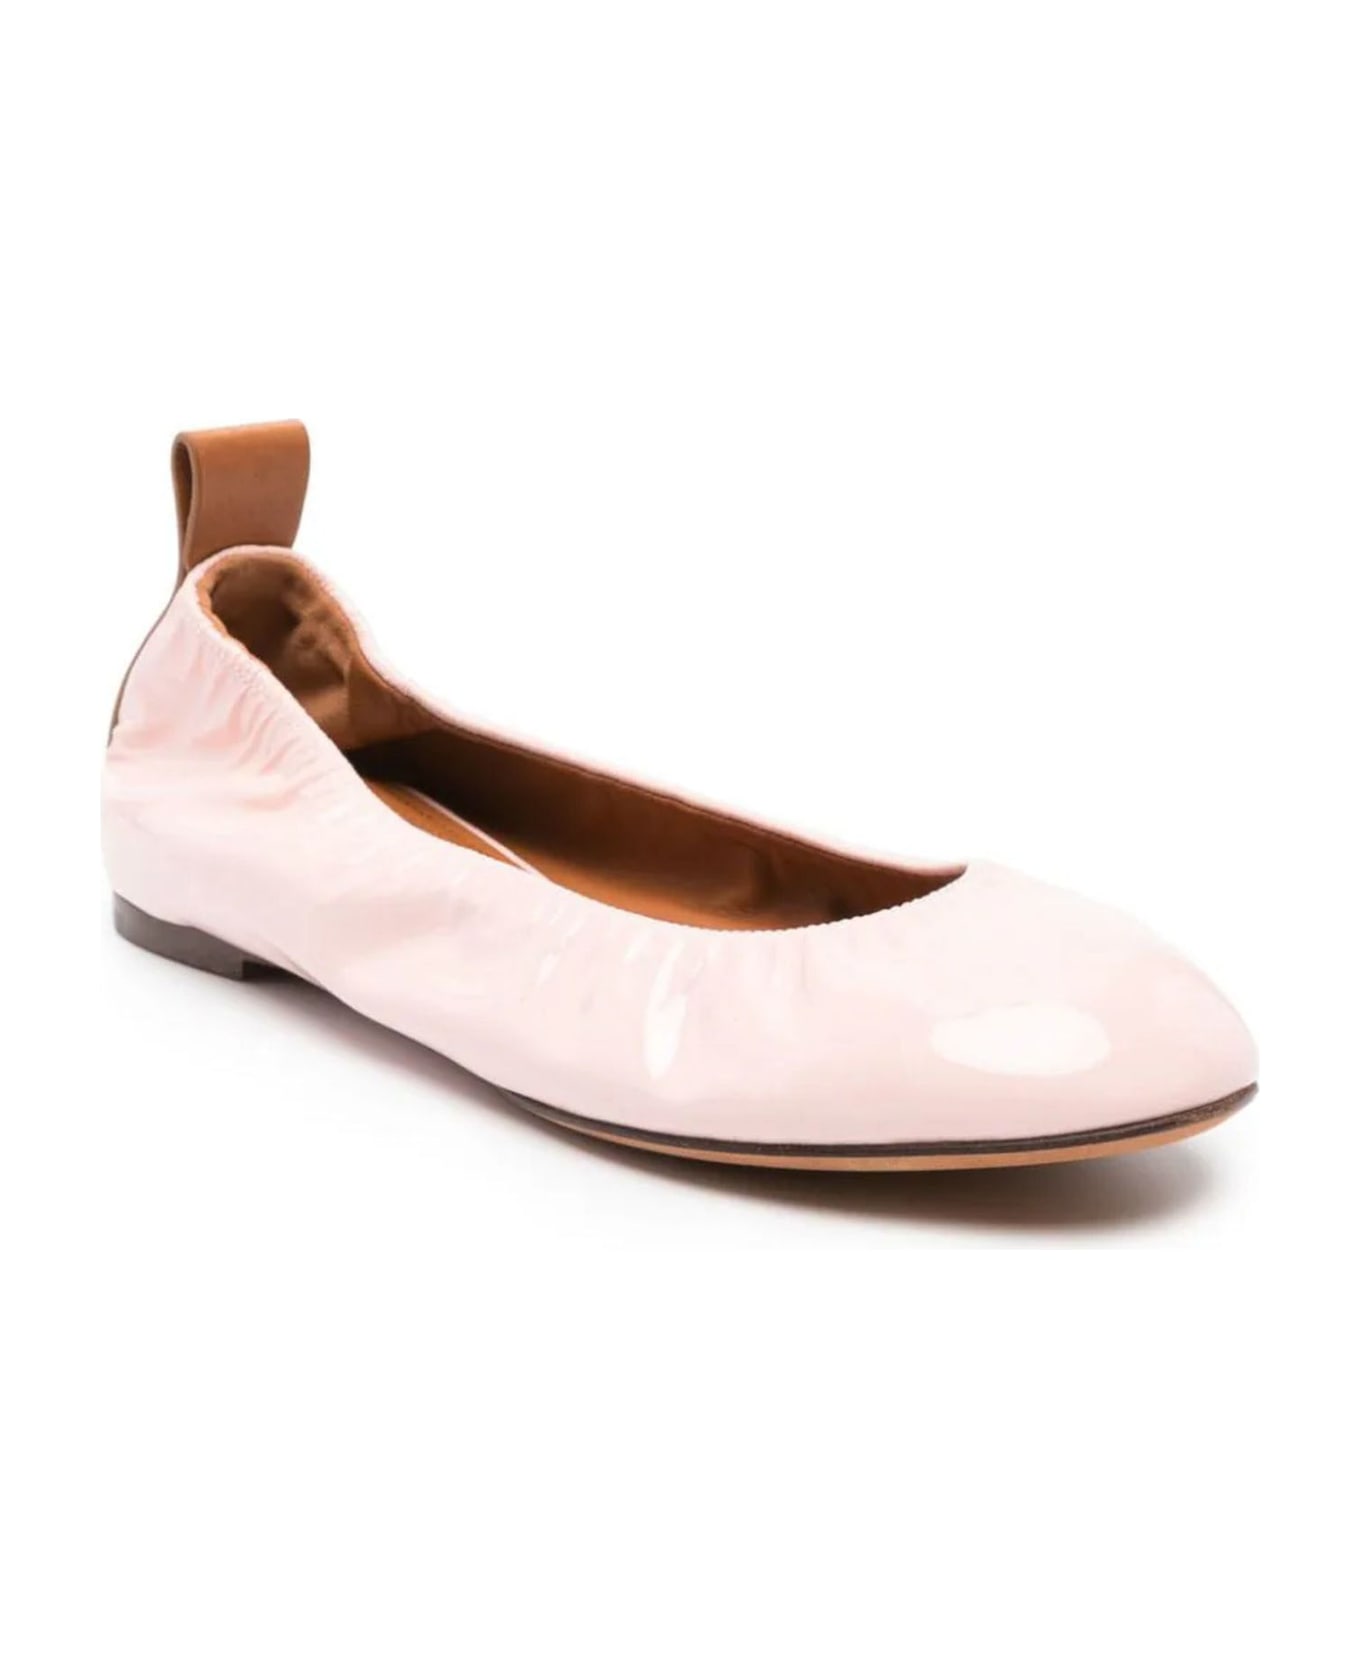 Lanvin Pink Patent Leather Ballerina Shoes - Pink